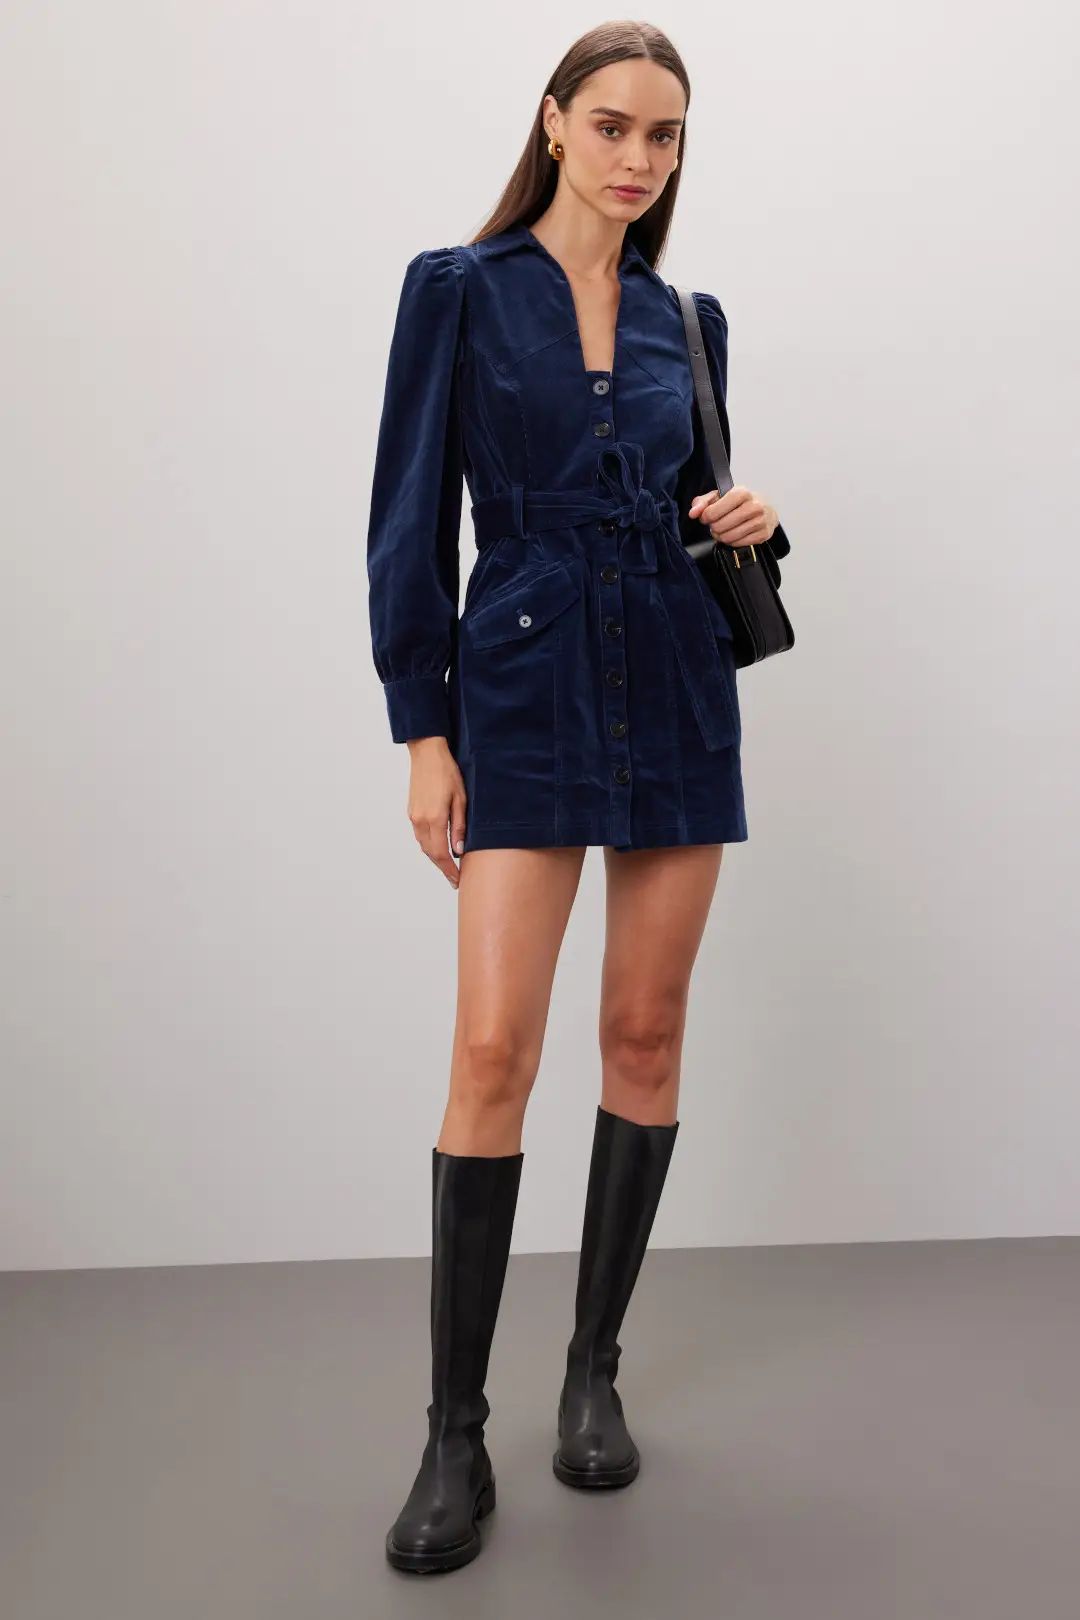 Corduroy Button Up Dress | Rent the Runway